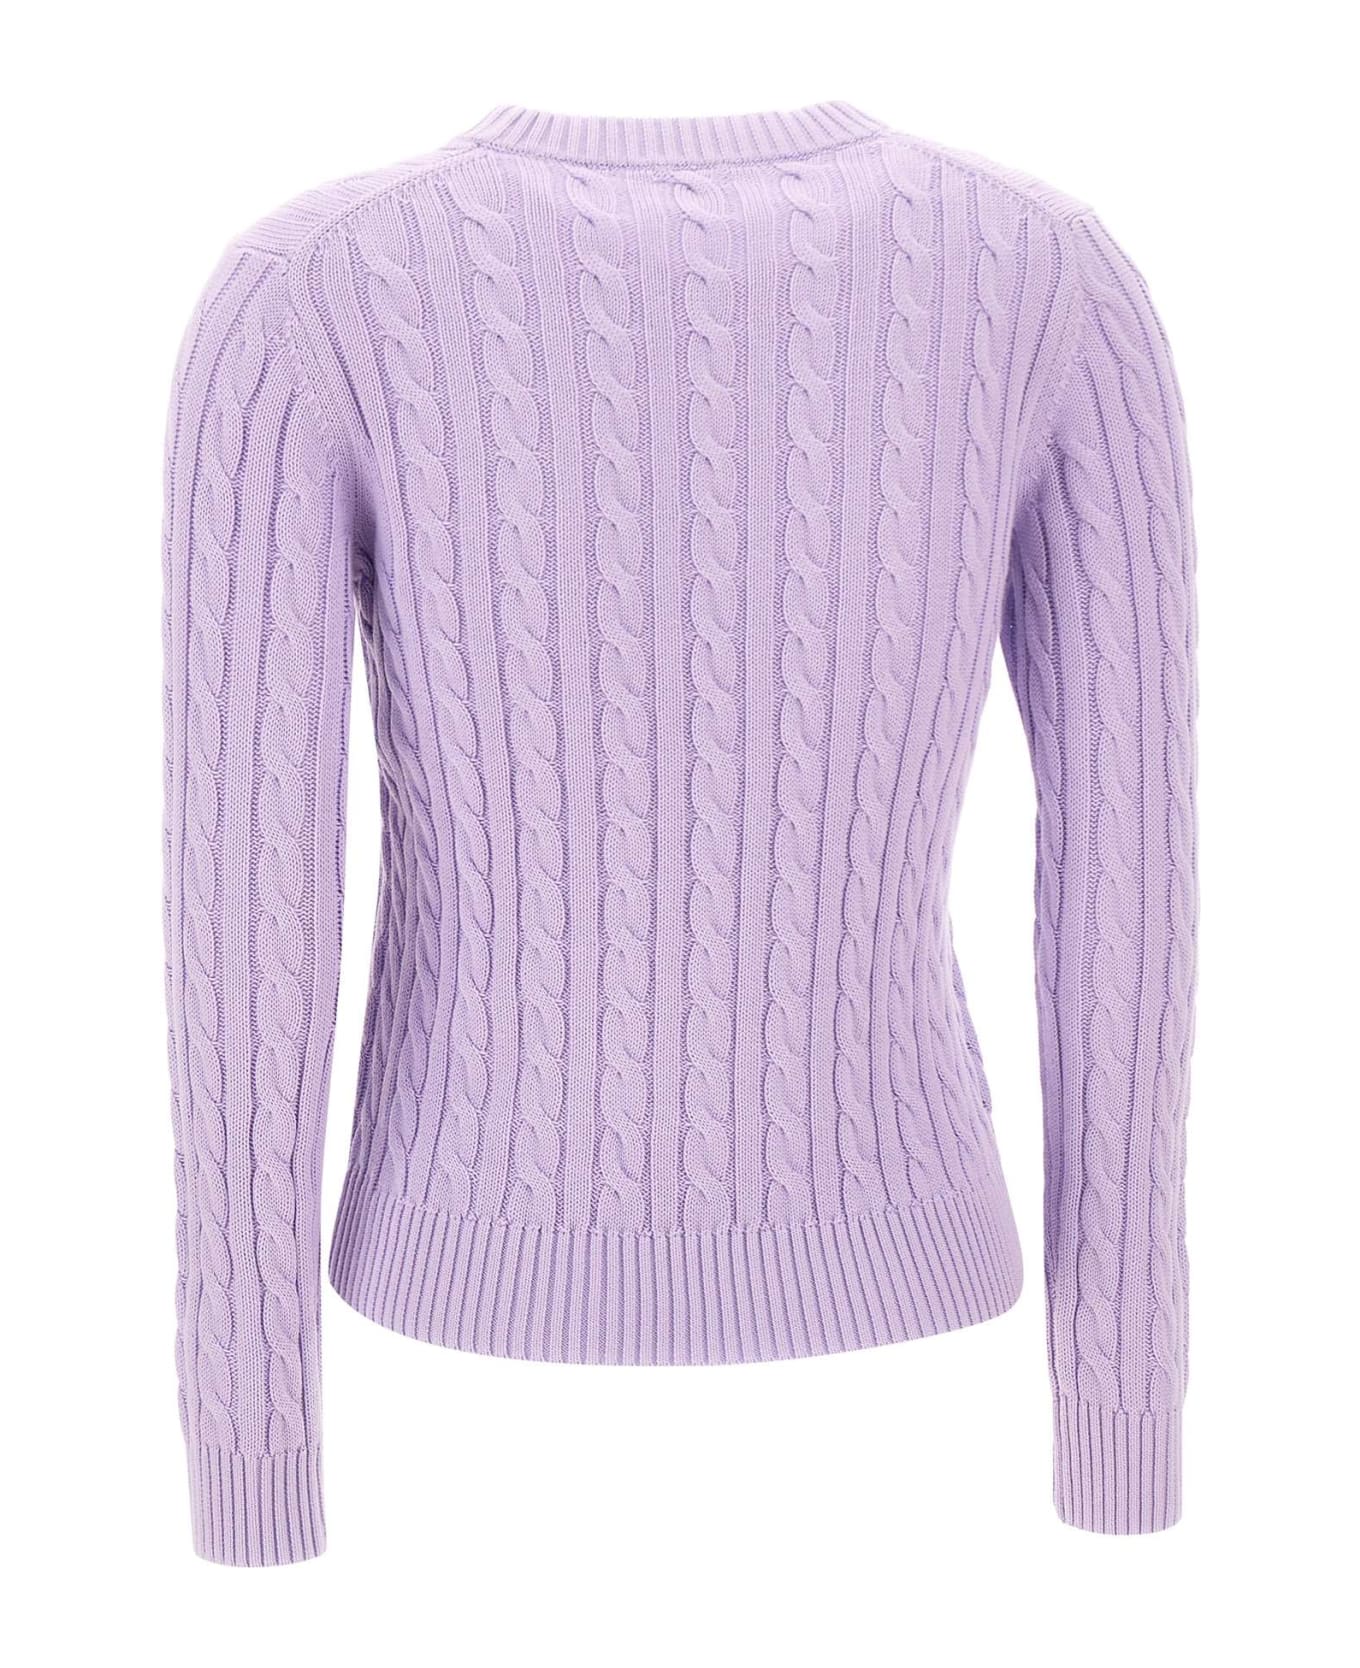 Sun 68 "round Neck Cable" Sweater Cotton - LILAC